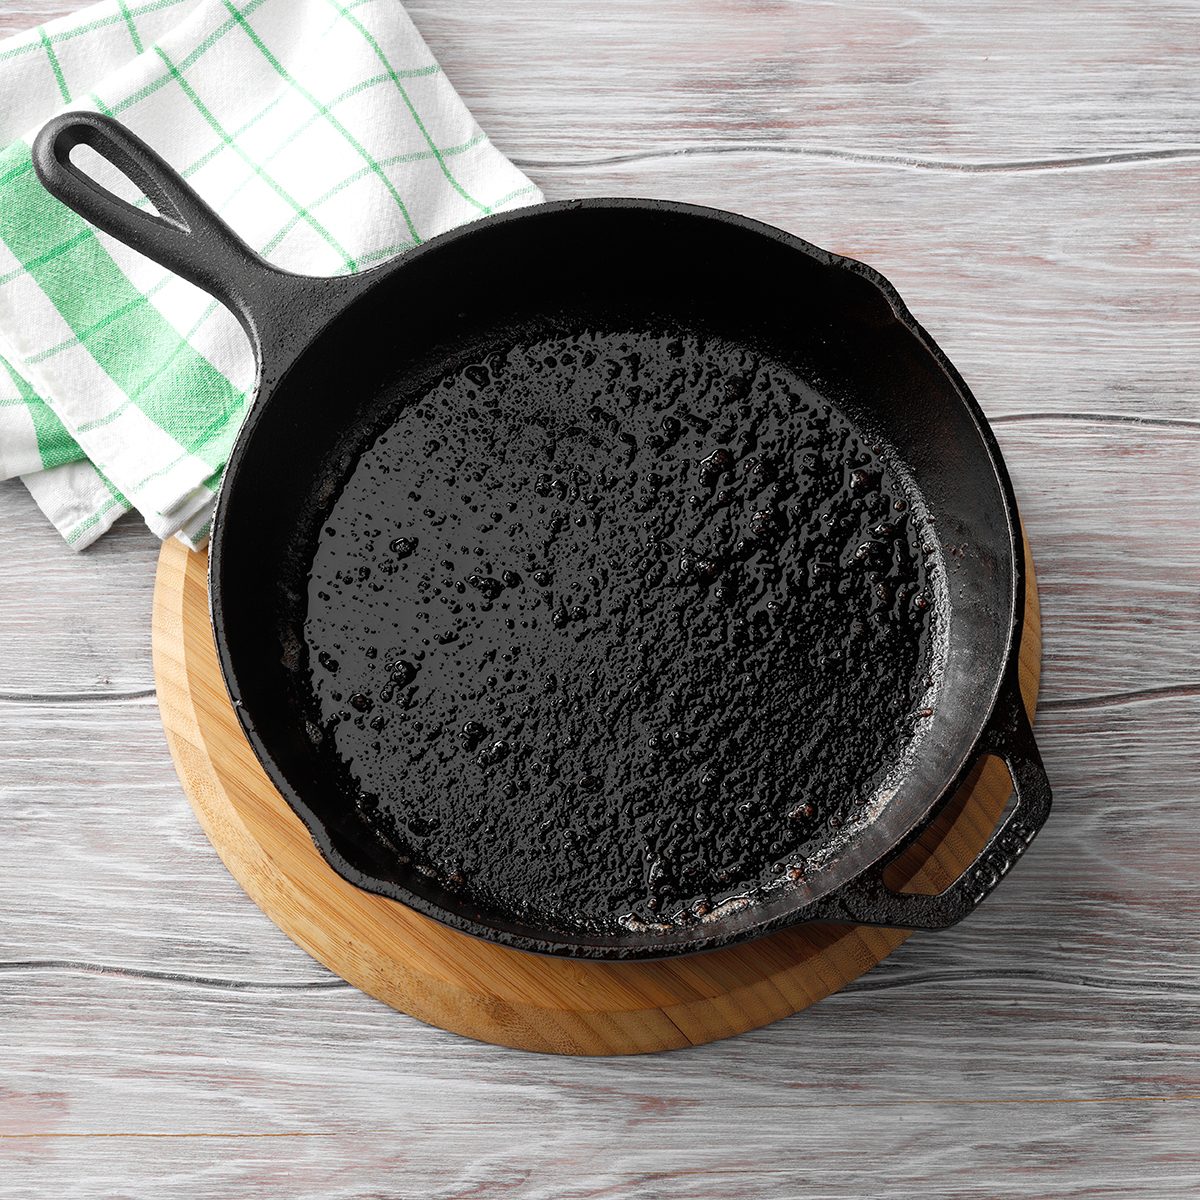 Best Tools For Maintaining A Cast-Iron Skillet - Forbes Vetted